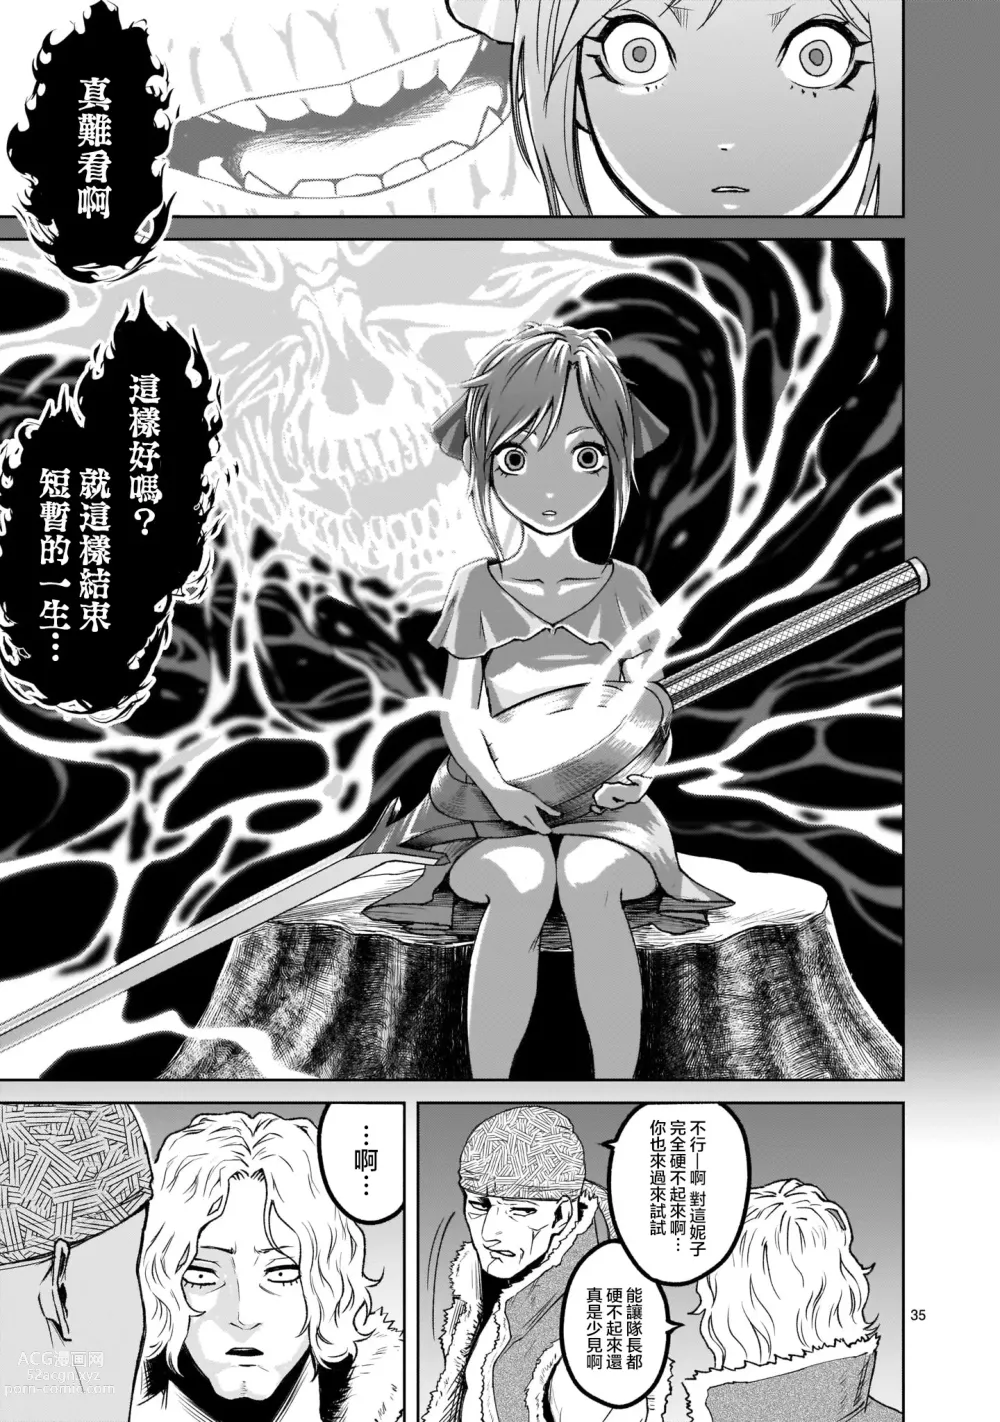 Page 32 of doujinshi 蔷薇园传奇 01Chinese